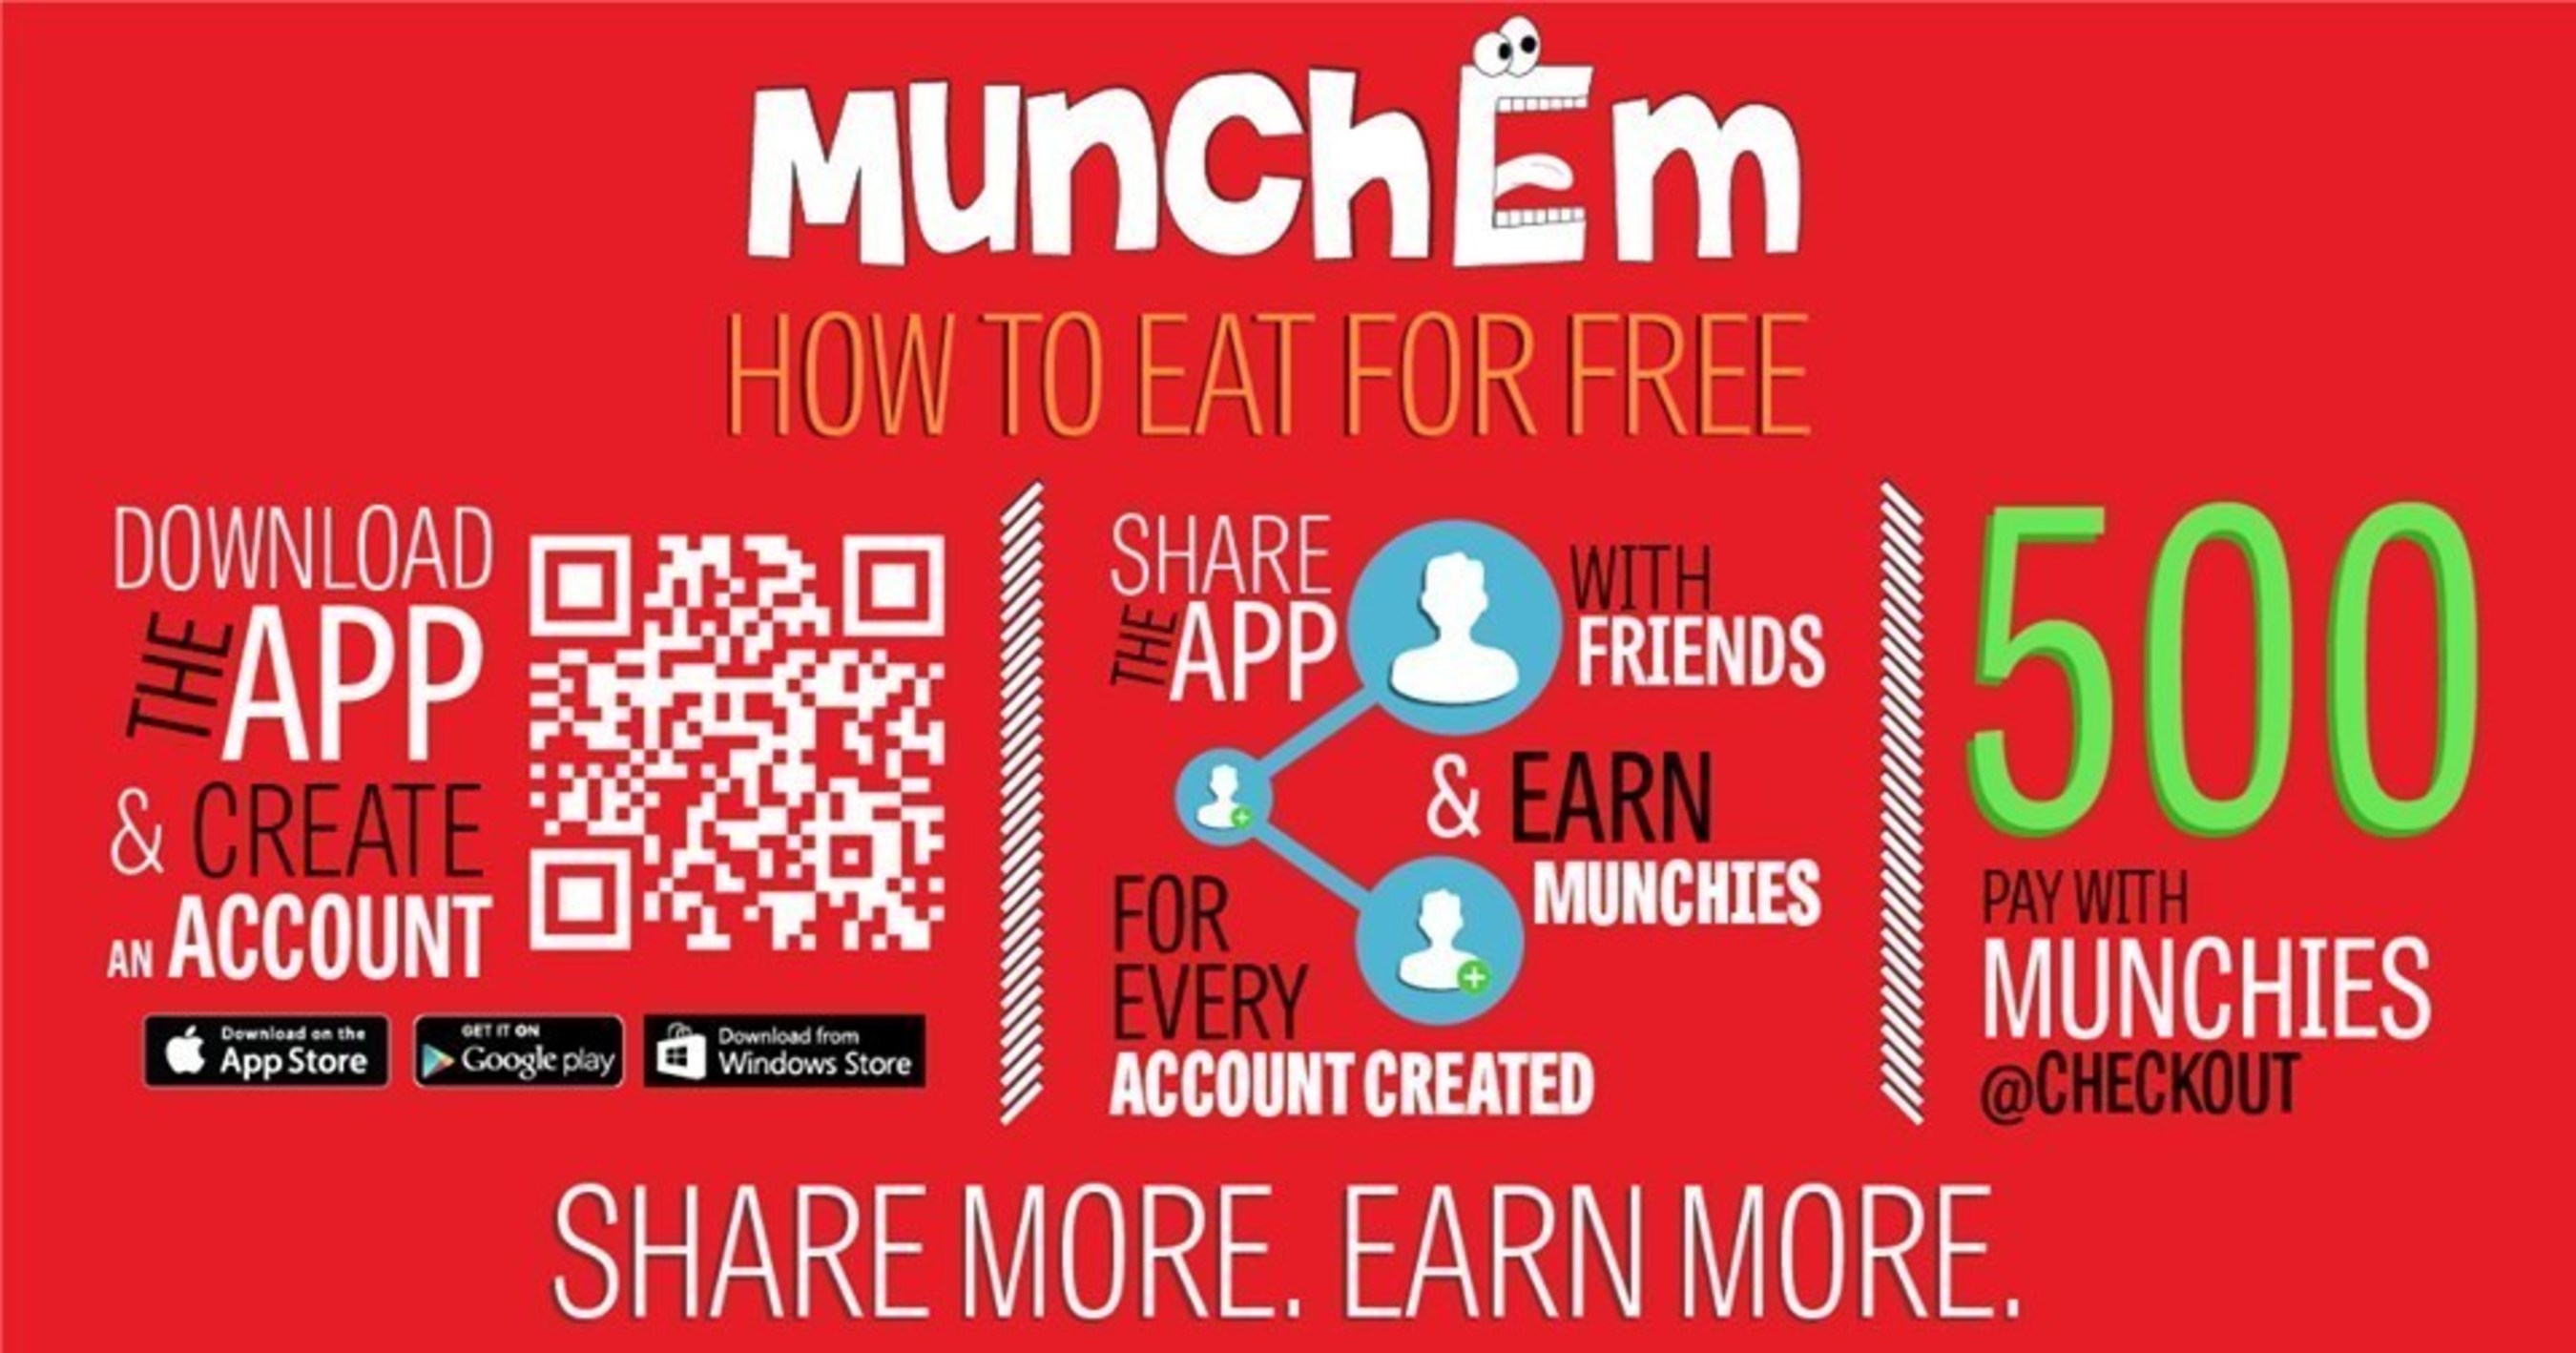 Earn Munchies By Sharing to Eat Free